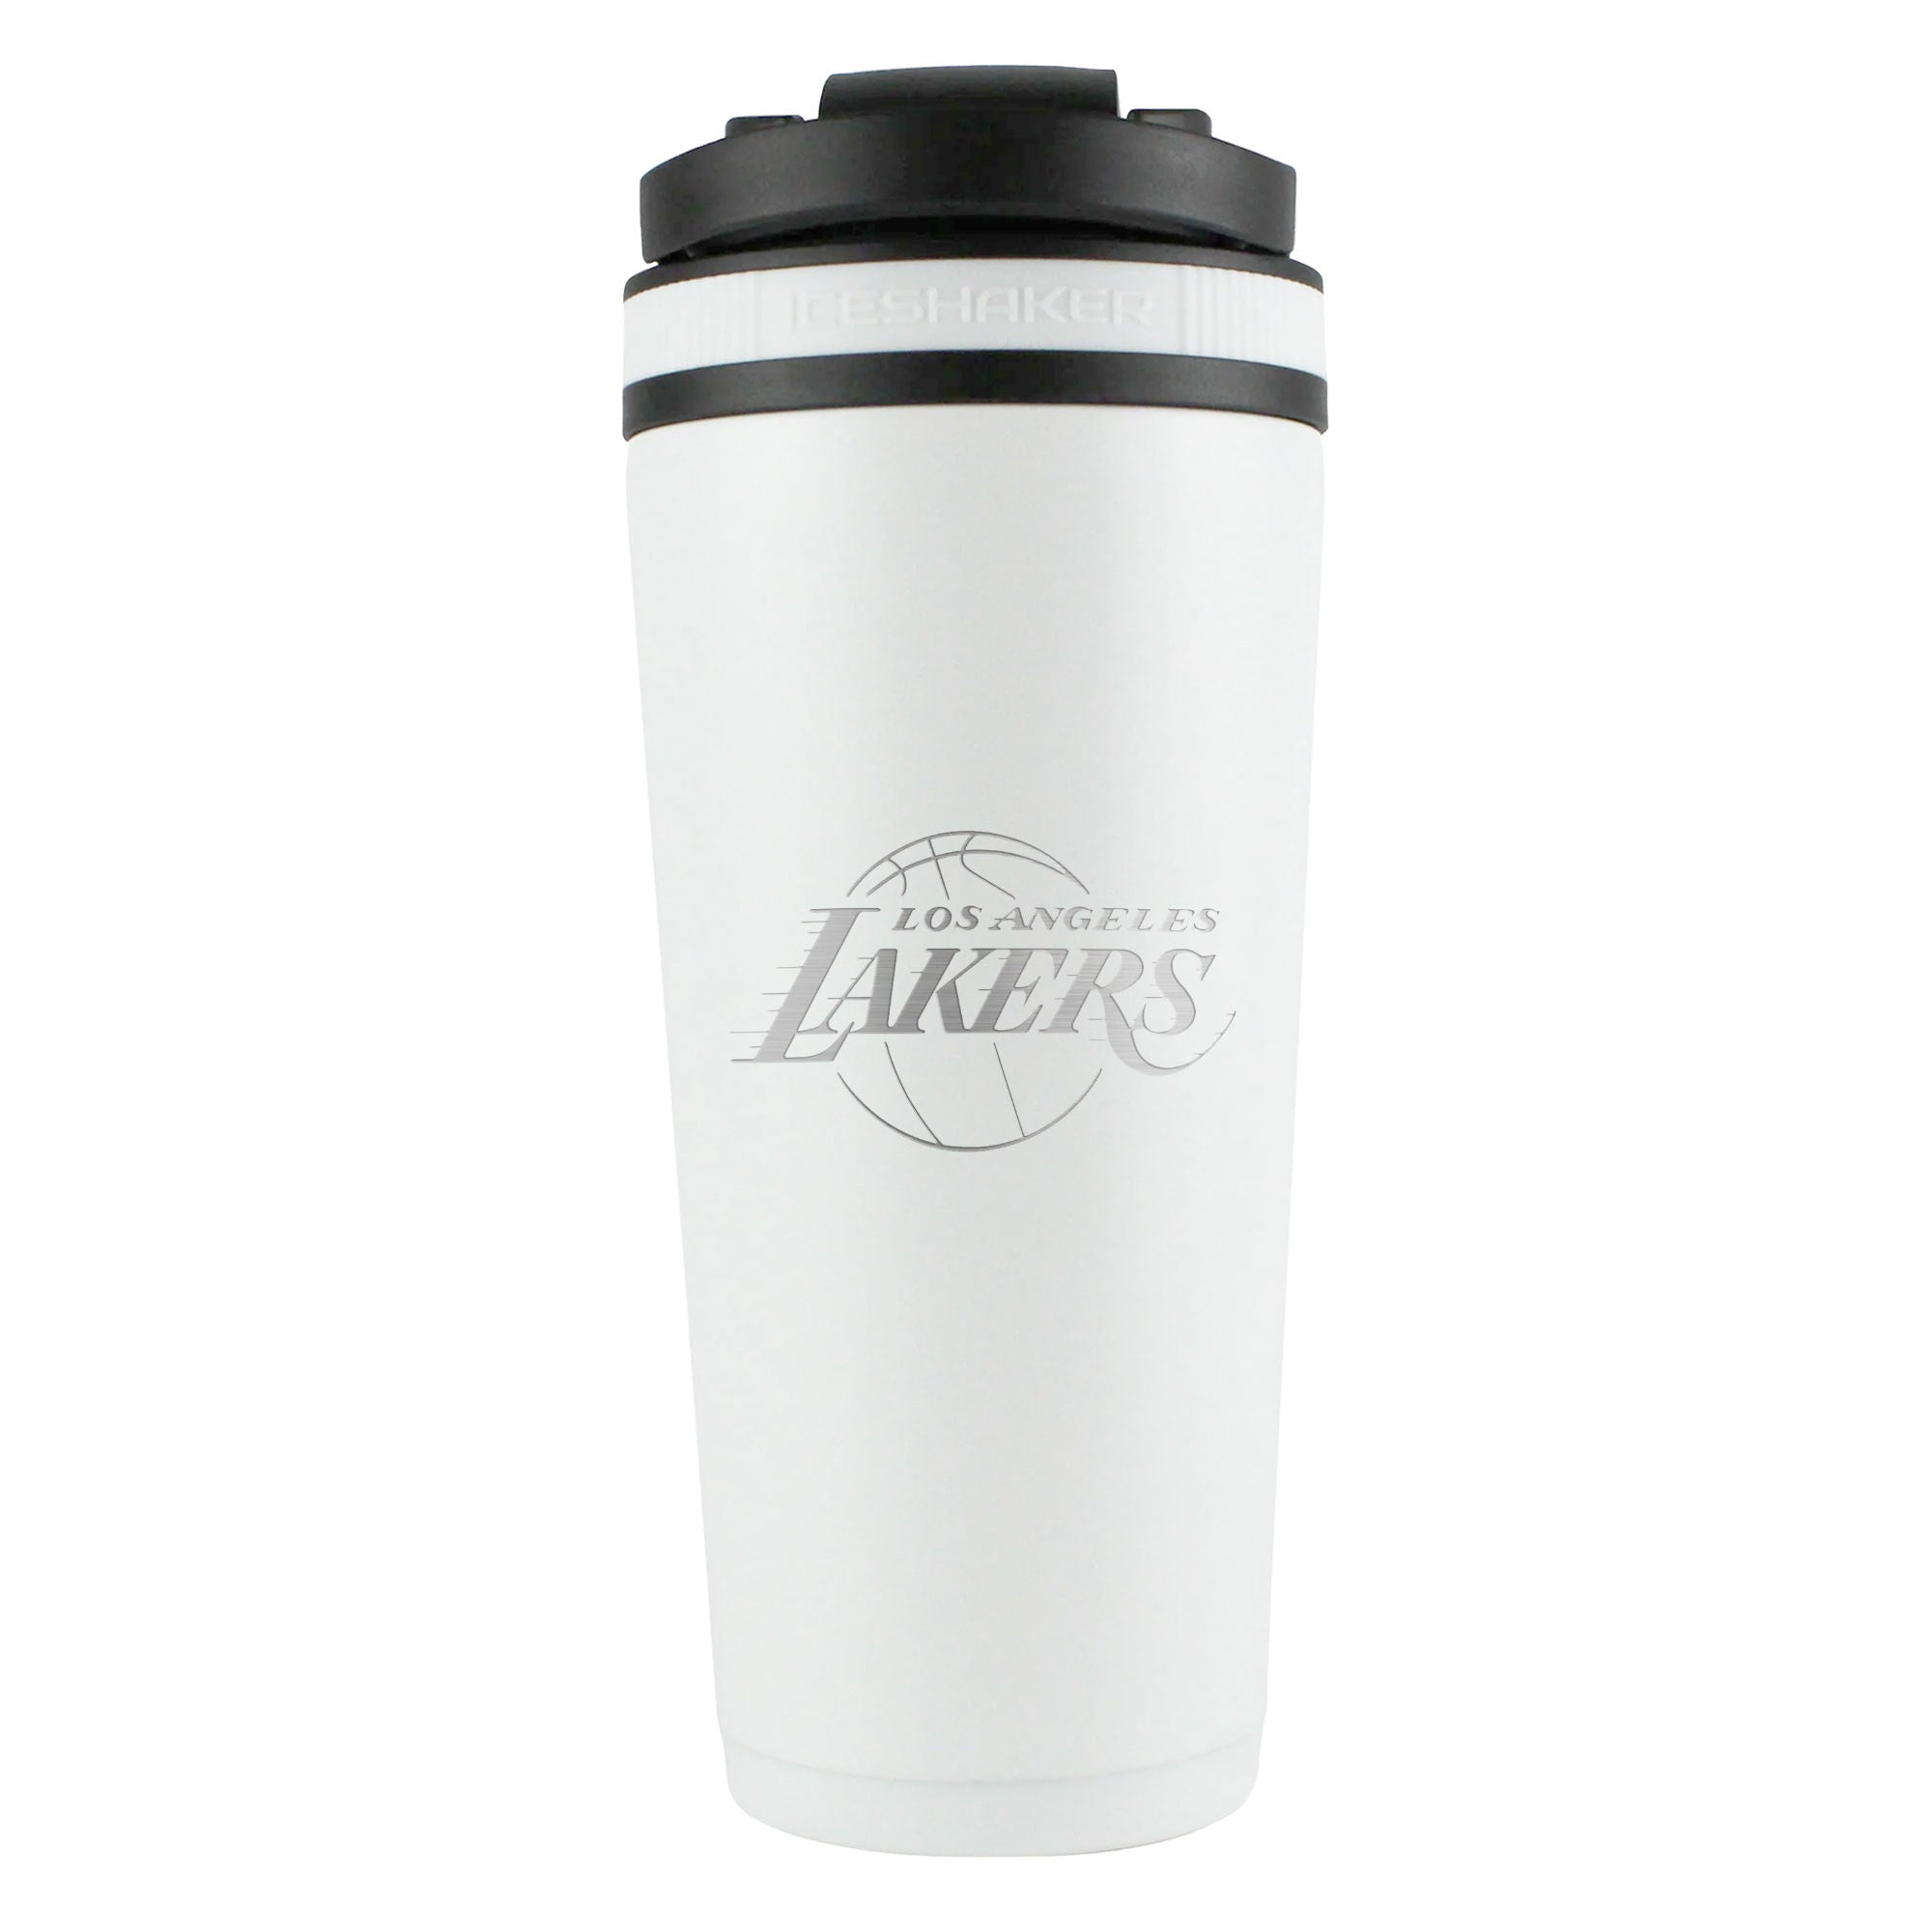 Officially Licensed Los Angeles Lakers 26oz Ice Shaker - White